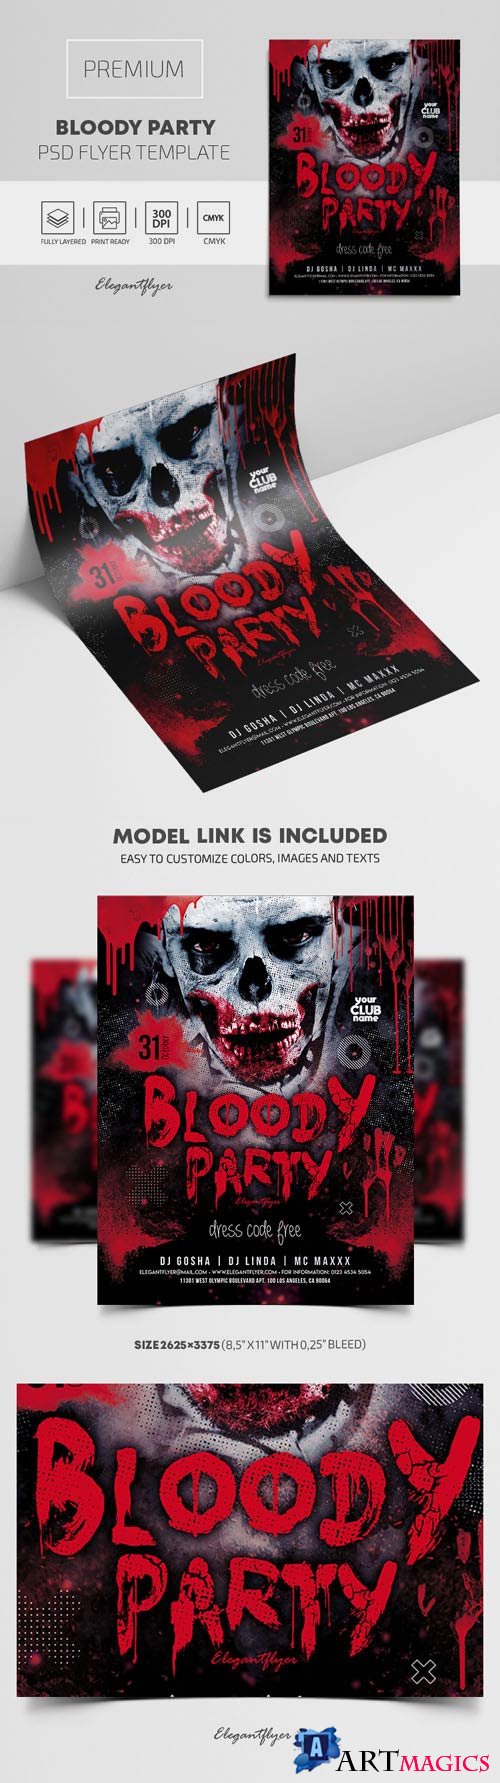 Bloody Party Premium PSD Flyer Template